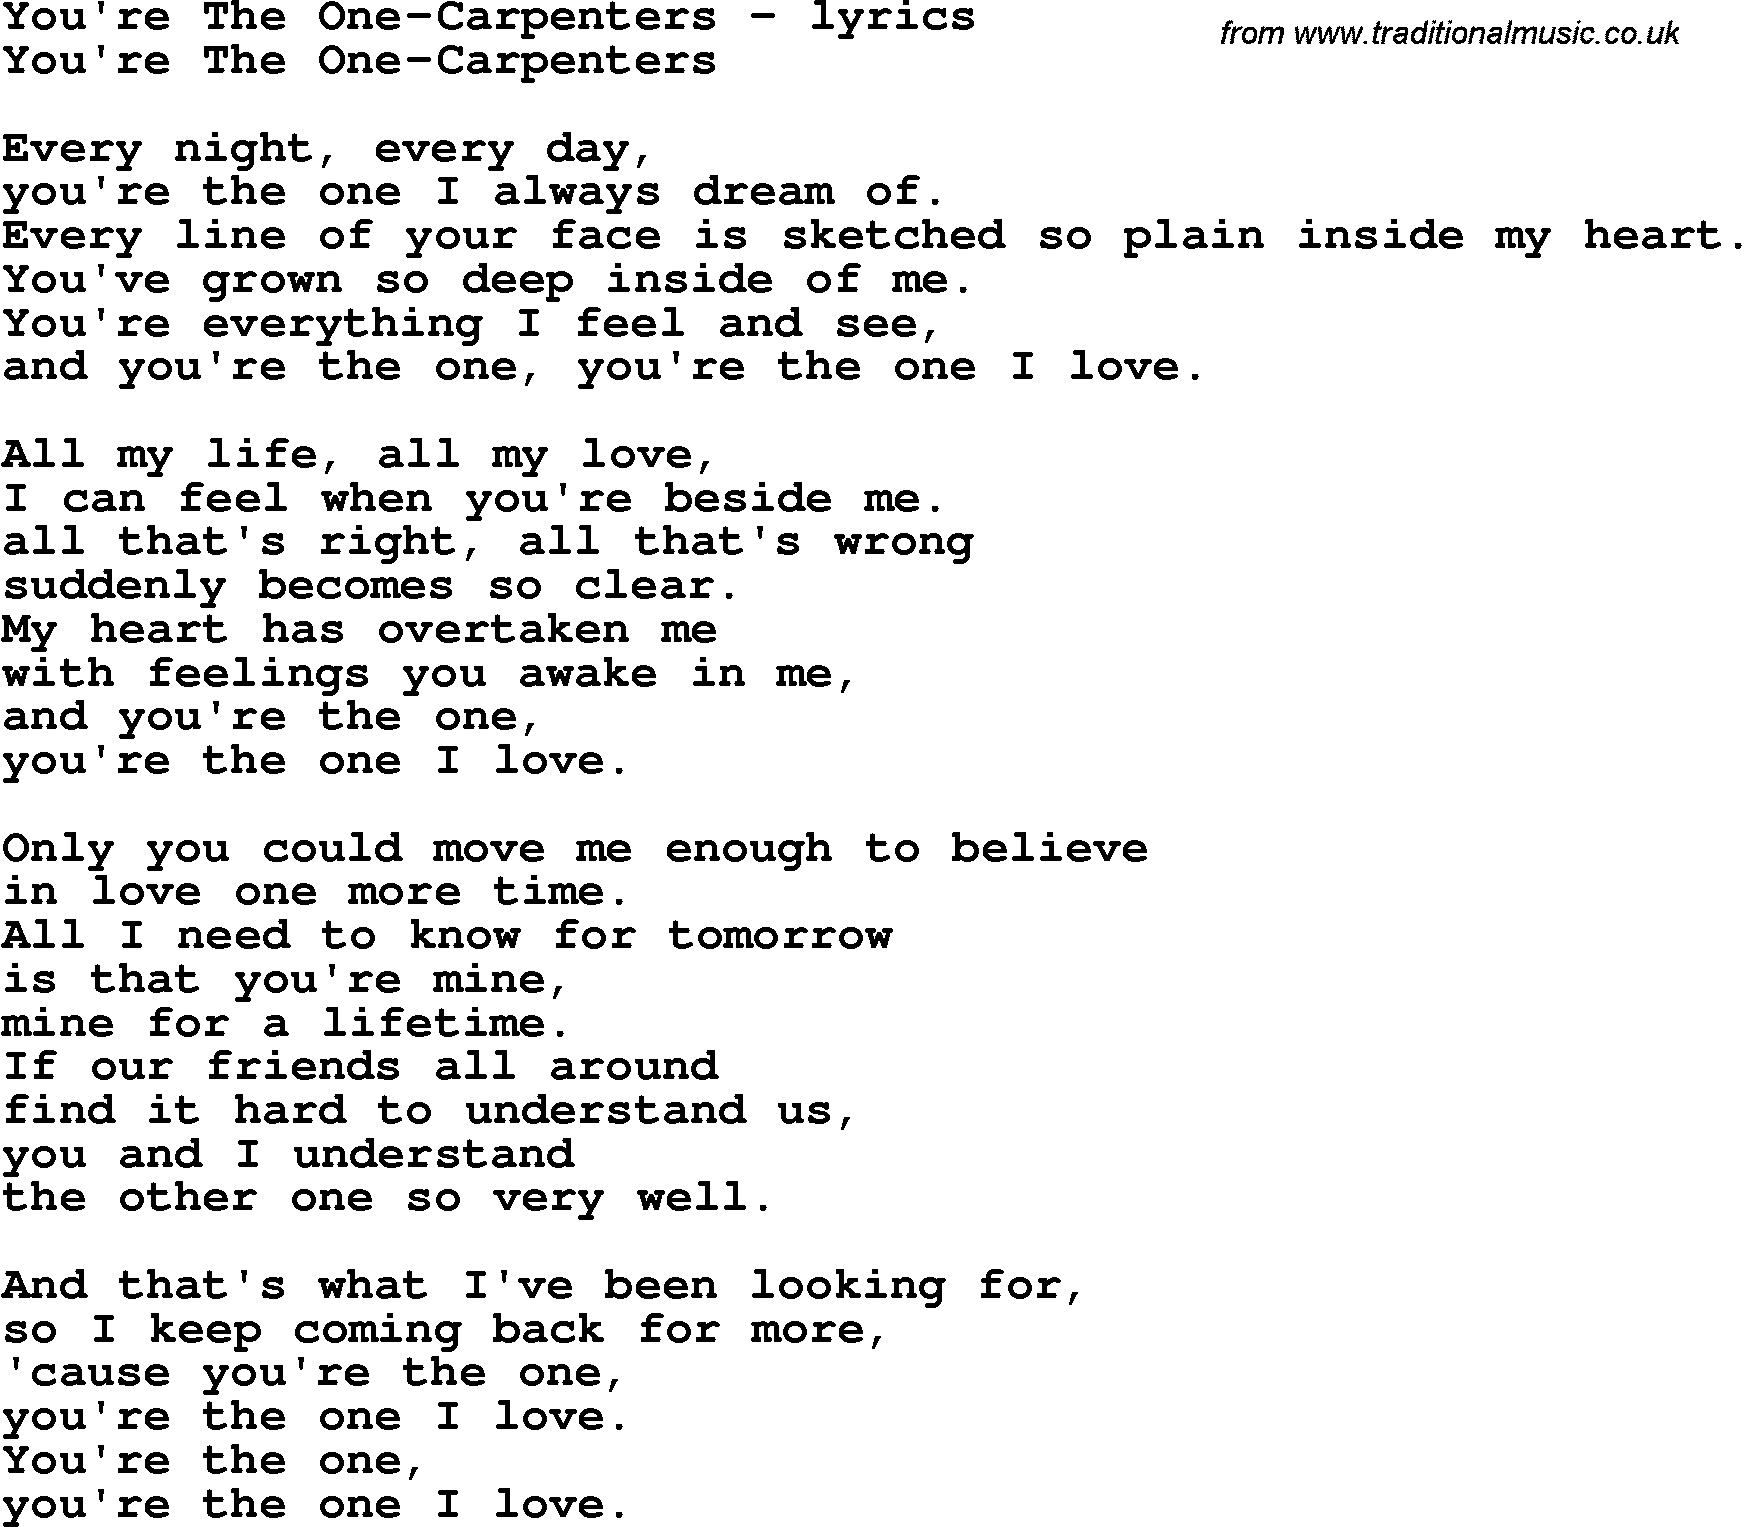 Love Song Lyrics for: You're The One-Carpenters